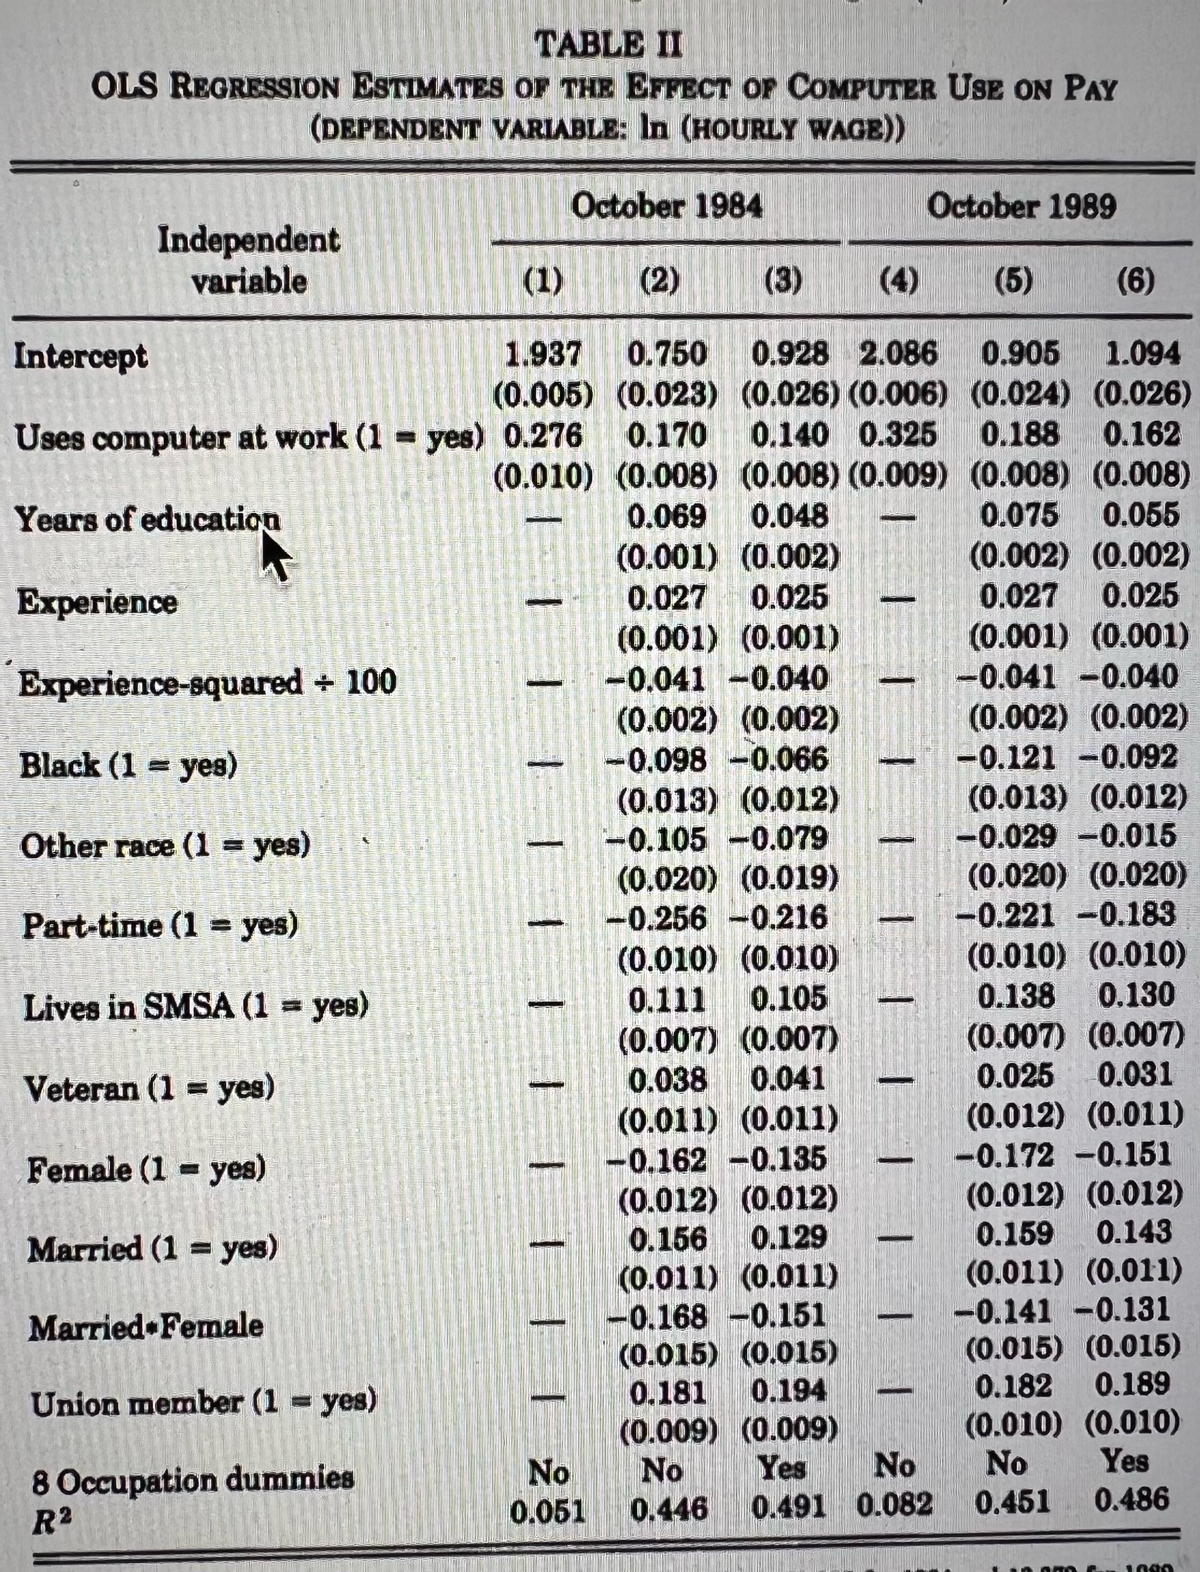 TABLE II
OLS REGRESSION ESTIMATES OF THE EFFECT OF COMPUTER USE ON PAY
(DEPENDENT VARIABLE: In (HOURLY WAGE))
October 1984
Independent
variable
Experience
Experience-squared + 100
Black (1 = yes)
Other race (1 = yes)
Part-time (1 = yes)
Lives in SMSA (1 = yes)
Veteran (1= yes)
Female (1 = yes)
Married (1 = yes)
Married Female
Union member (1 = yes)
8 Occupation dummies
R2
I
(2) (3)
No
0.051
(1)
Intercept
1.937 0.750
0.928 2.086
0.905 1.094
(0.005)
(0.023)
(0.026) (0.006) (0.024) (0.026)
Uses computer at work (1 = yes) 0.276
0.170
0.140 0.325
0.188 0.162
(0.008) (0.008) (0.009) (0.008) (0.008)
(0.010)
Years of education
0.069 0.048
0.075 0.055
(0.001) (0.002)
0.027 0.025
(0.001) (0.001)
-0.041 -0.040
(0.002) (0.002)
-0.098 -0.066
€
(0.013) (0.012)
-0.105 -0.079
(0.020) (0.019)
-0.256 -0.216
(0.010) (0.010)
0.111 0.105
(0.007) (0.007)
0.038
0.041
(0.011) (0.011)
-0.162 -0.135
(0.012) (0.012)
0.156 0.129
(0.011) (0.011)
-0.168 -0.151
(0.015) (0.015)
0.181
0.194
(0.009) (0.009)
No
Yes
0.446
October 1989
-
(5)
No
0.491 0.082
(6)
(0.002) (0.002)
0.027 0.025
(0.001) (0.001)
-0.041 -0.040
(0.002) (0.002)
-0.121 -0.092
(0.013) (0.012)
-0.029 -0.015
70
(0.020) (0.020)
-0.221 -0.183
(0.010) (0.010)
0.138 0.130
(0.007) (0.007)
0.025 0.031
(0.012) (0.011)
-0.172 -0.151
(0.012) (0.012)
0.159 0.143
(0.011) (0.011)
-0.141 -0.131
(0.015) (0.015)
0.182
0.189
(0.010) (0.010)
No
Yes
0.451
0.486
in sa
A 1690